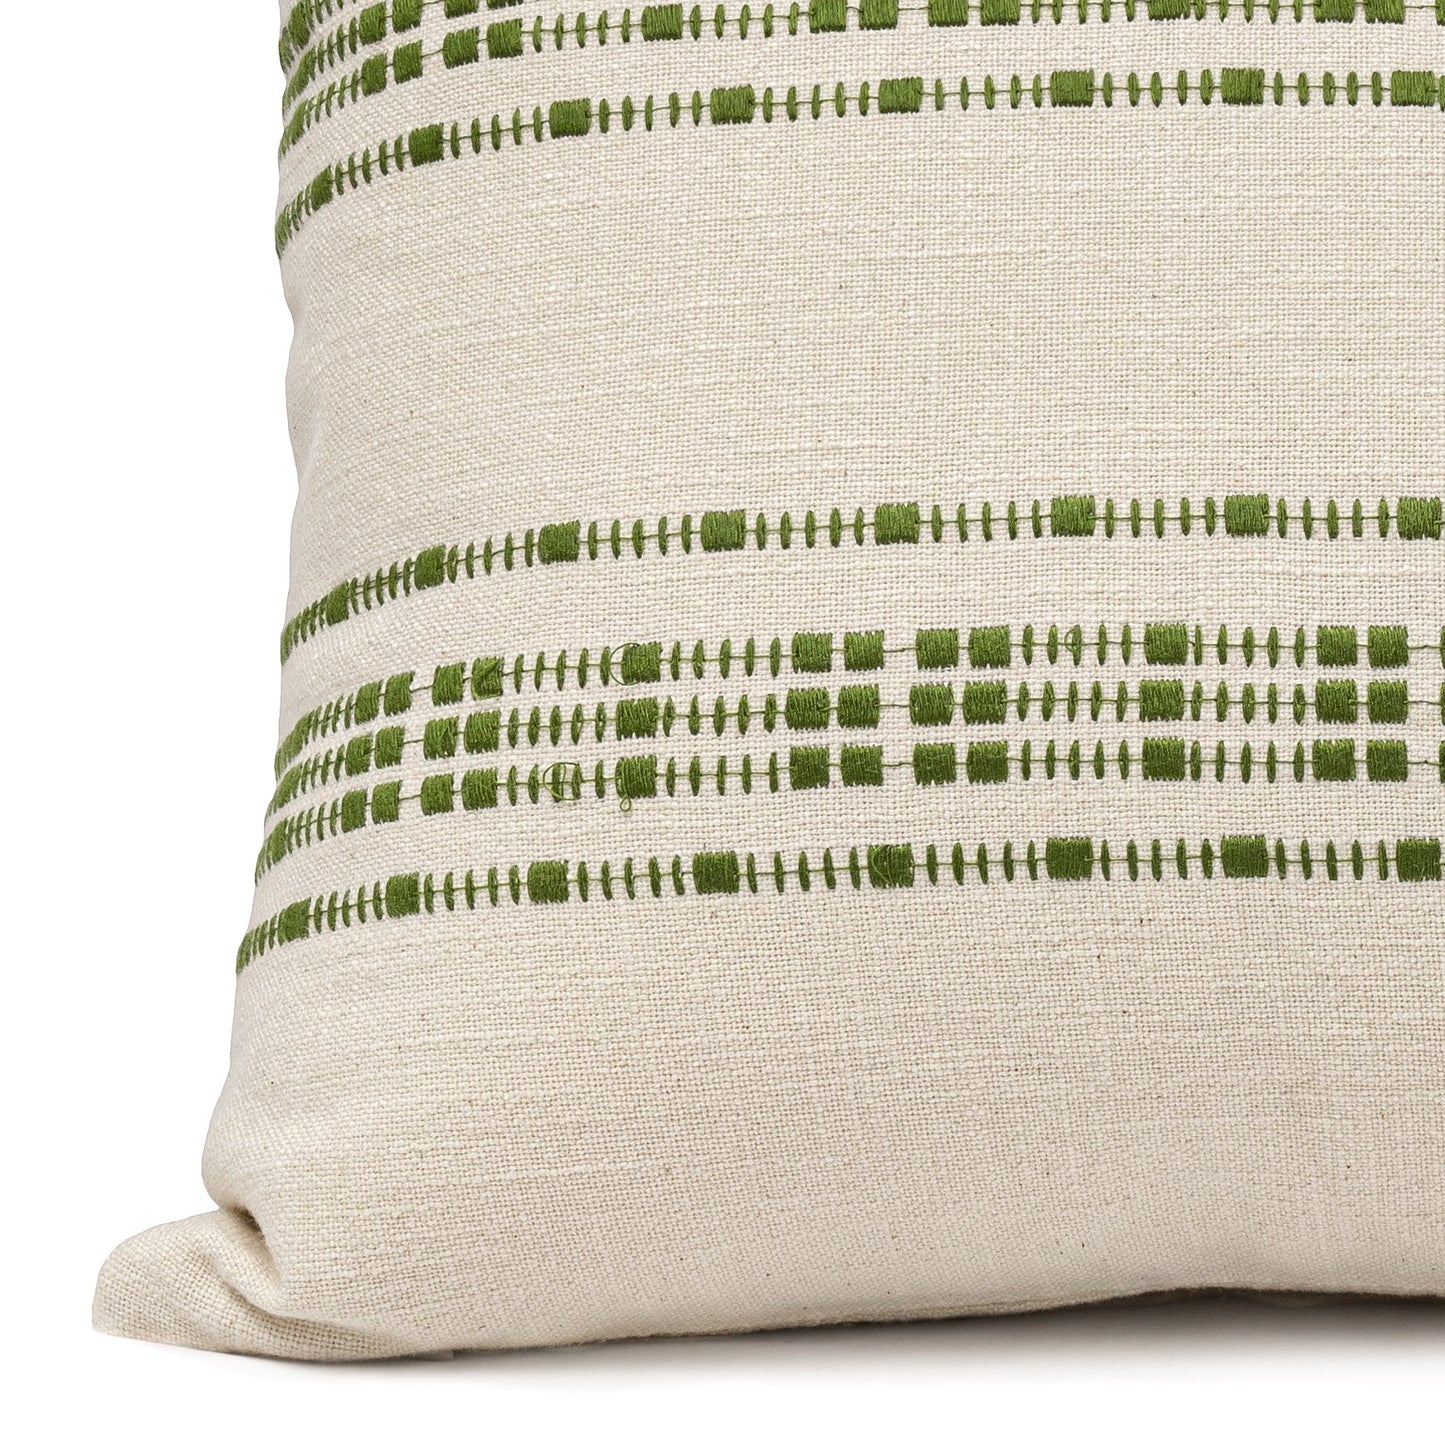 Close up of a Green embroidered cotton lumbar cushion cover